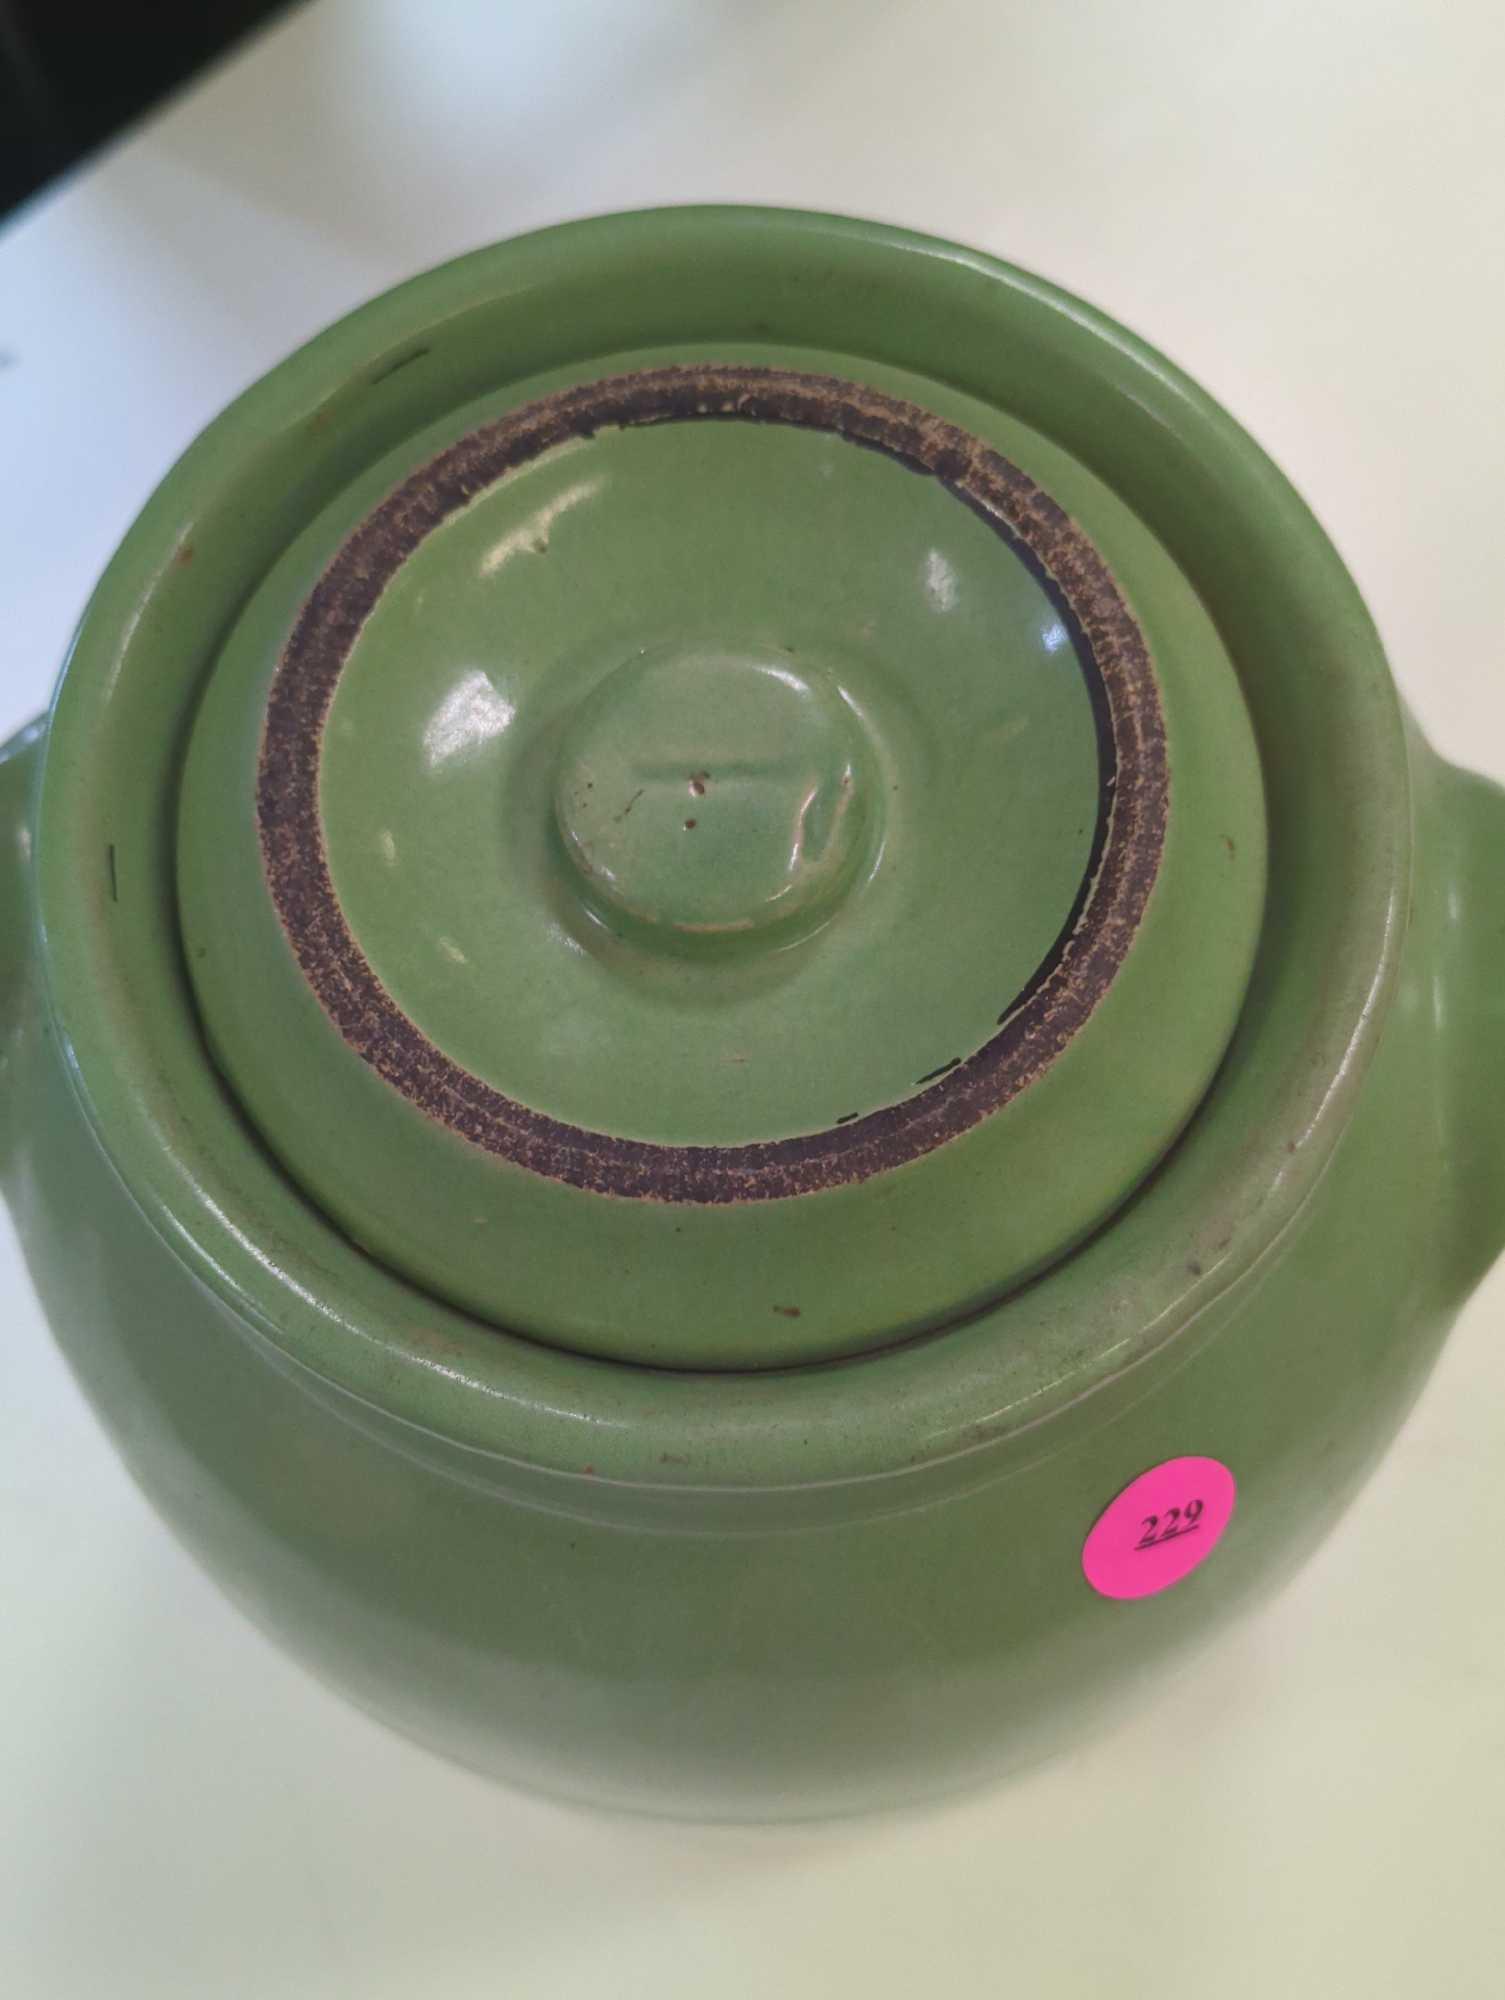 Vintage Cookie Jar With Lid Green ware Hand Painted Pottery 10.5"H X 8"D, What you see in photos is